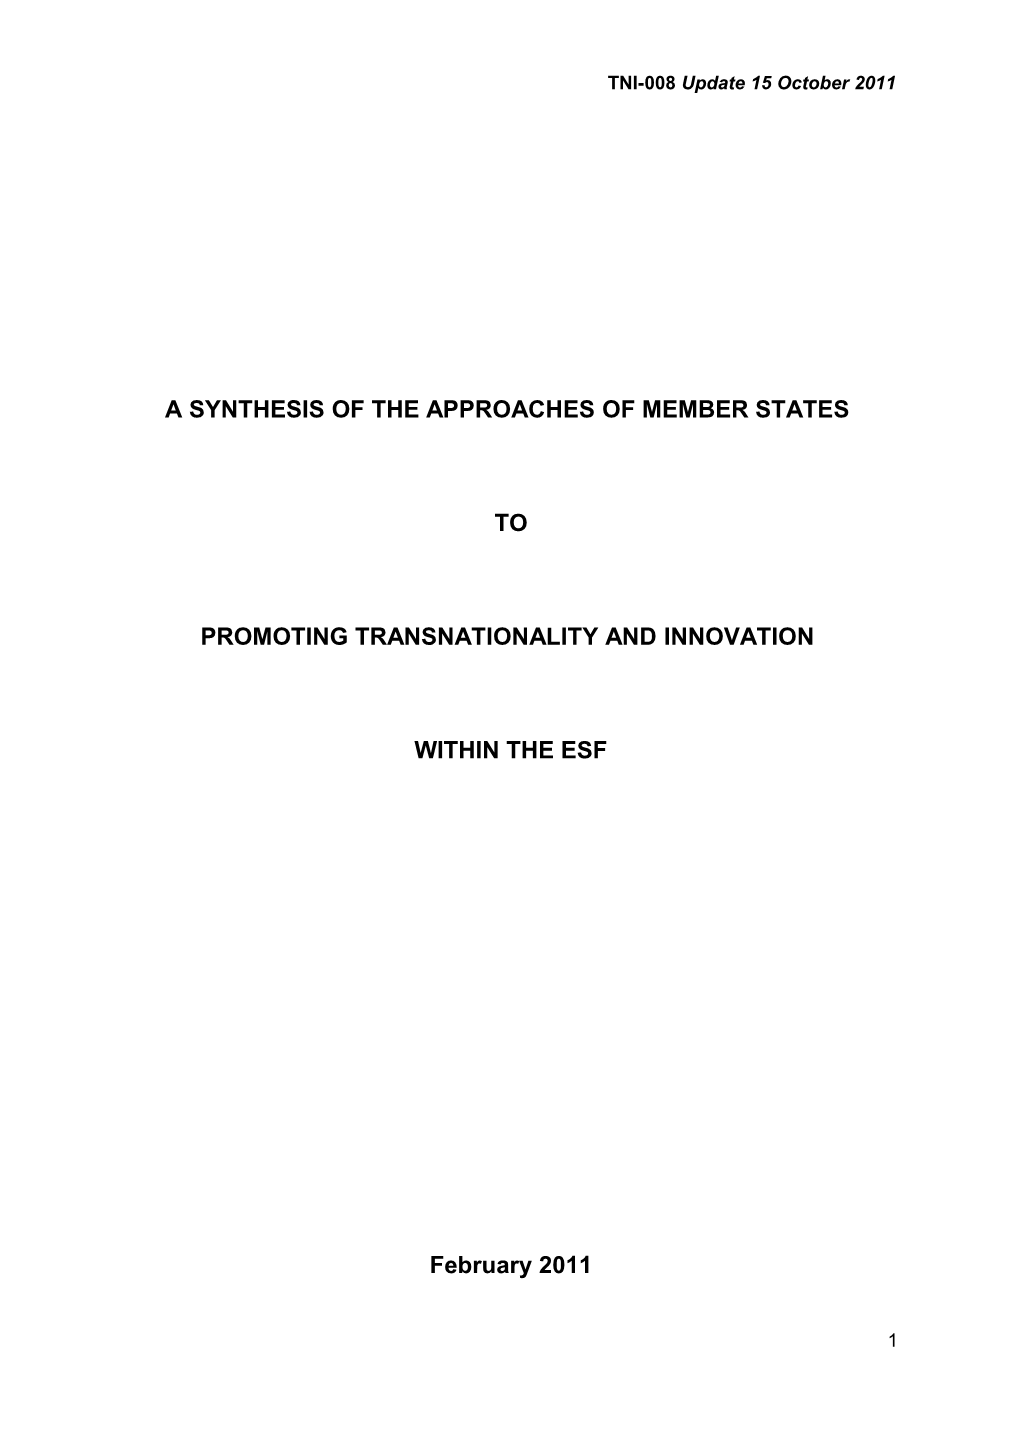 A Synthesis of the Approaches of Member States